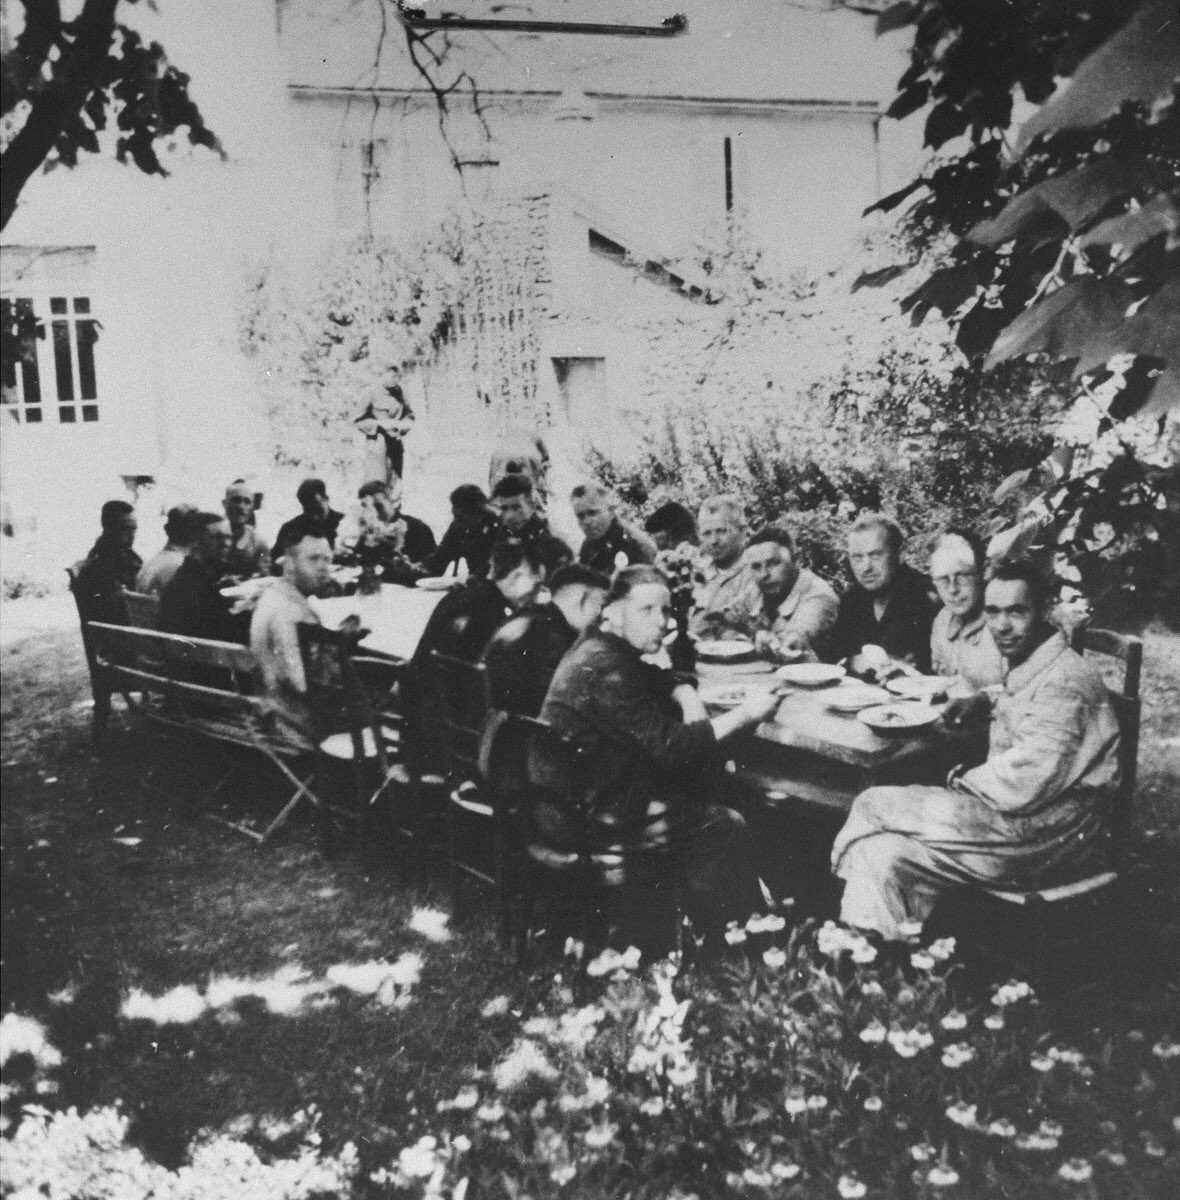  #Pancevo was where the main elements of the Rgt were located. It was under command of IV Btl C/O Obstlt Bandelow. There appeared Waffen SS elements attached to  #GD from Das Reich, too. Pic of Bandelow commandeered villa with officers/ethnic Germans. #History  #SWW  #WW23)